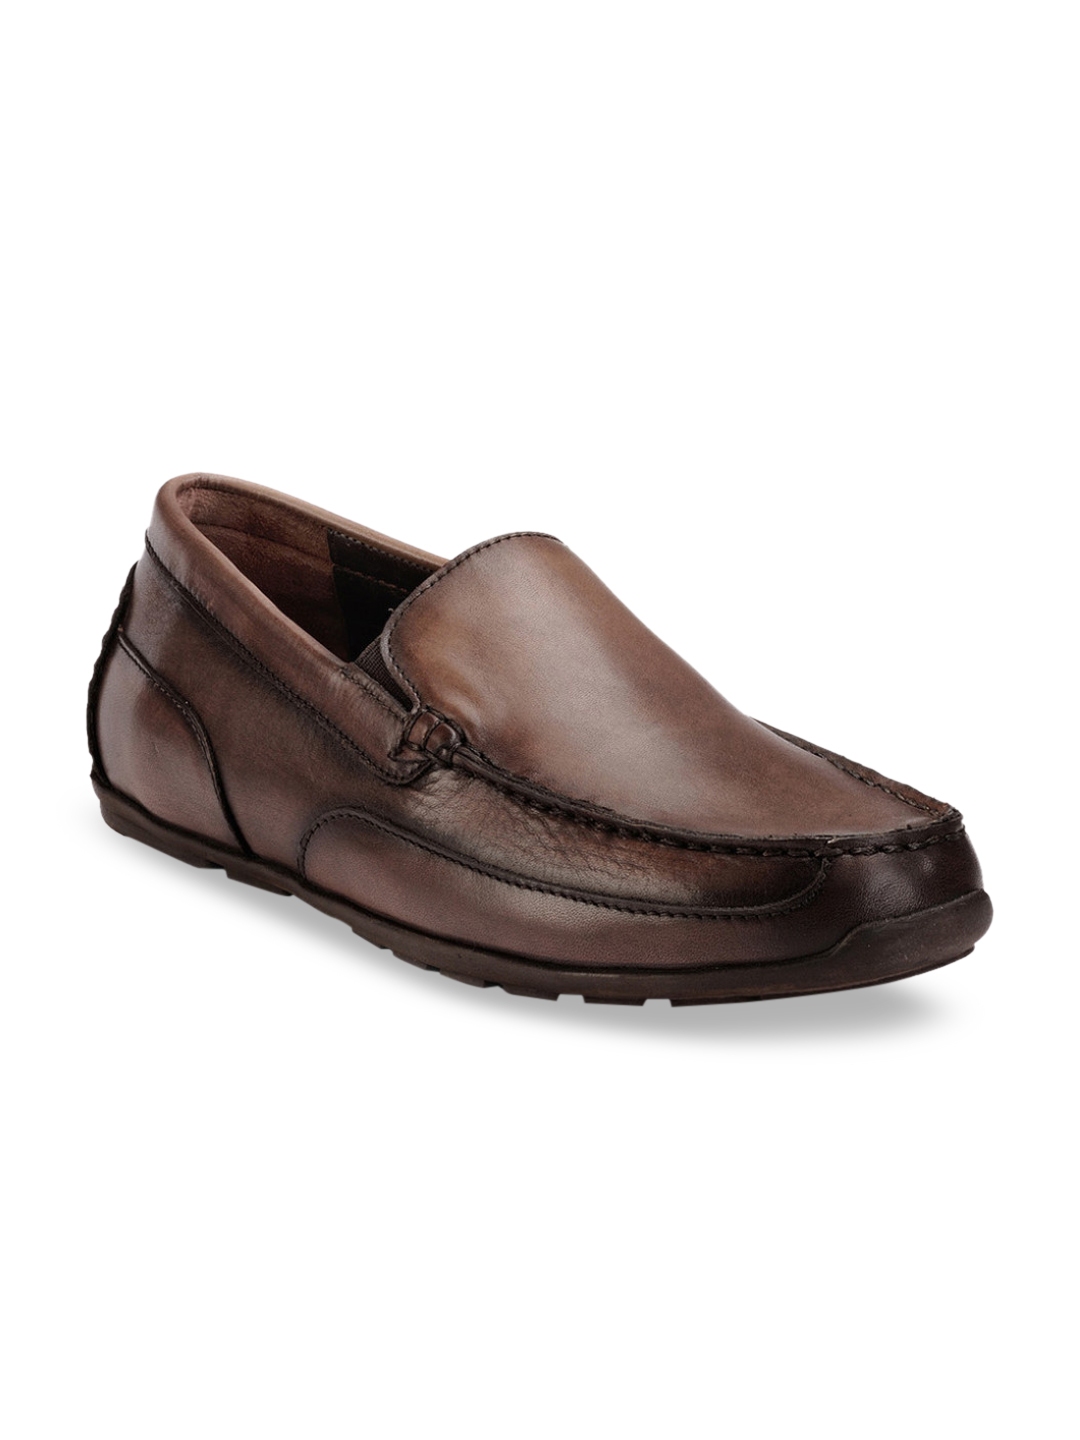 Buy Teakwood Leathers Men Brown Driving Shoes - Casual Shoes for Men